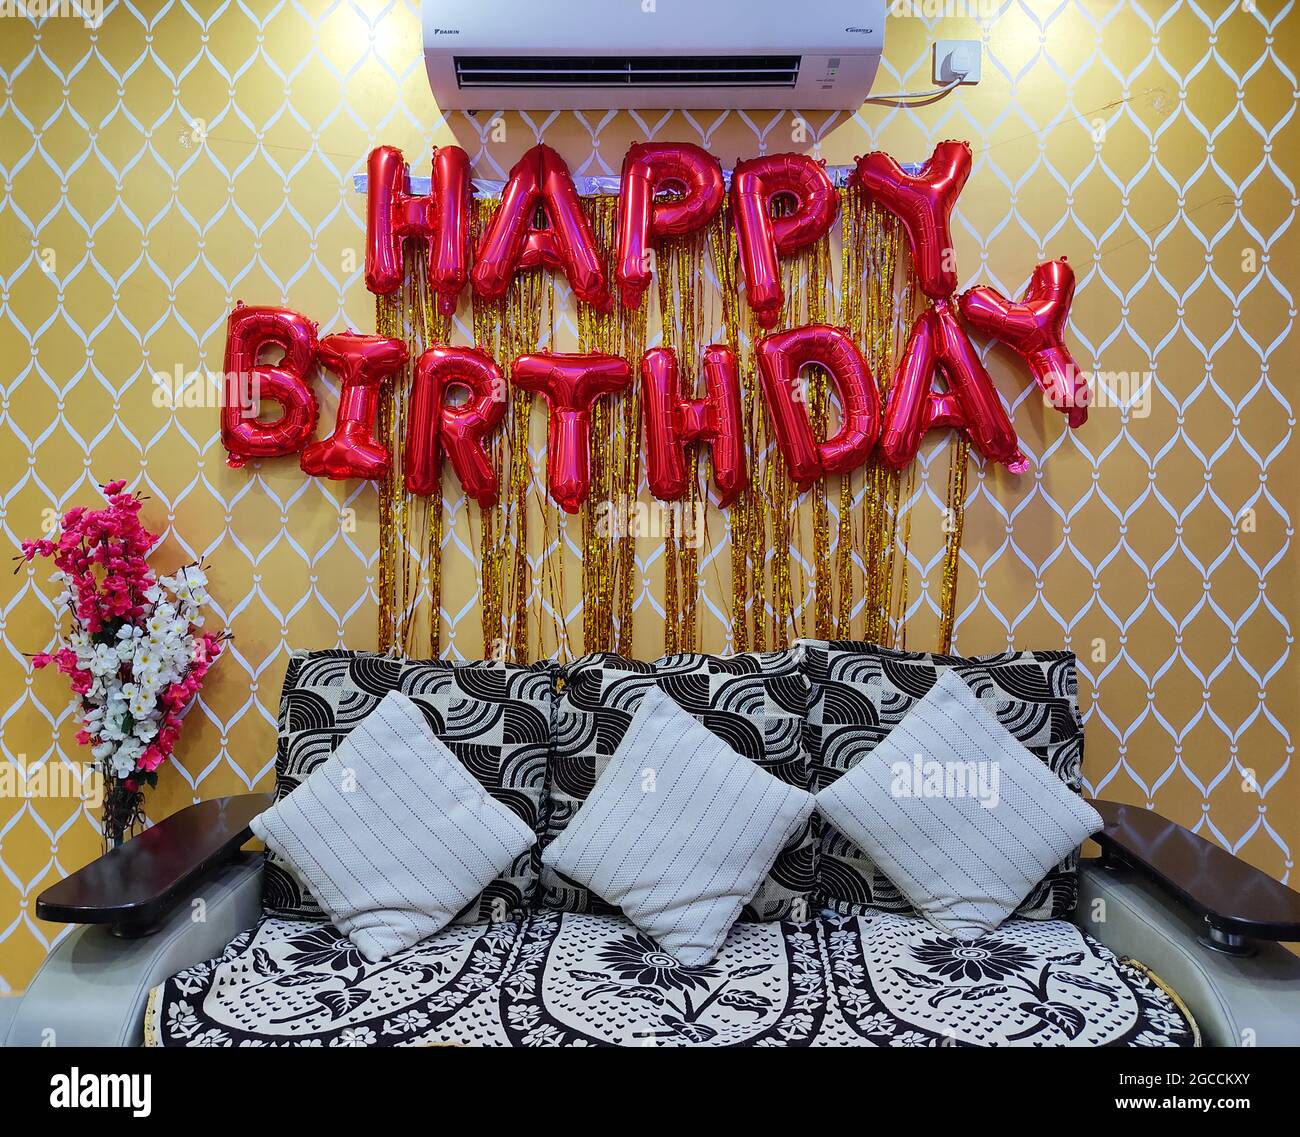 Happy Birthday Golden Balloon Hanging Banner on Wall. Birthday Party  Decorations. Home Interior Stock Photo - Alamy